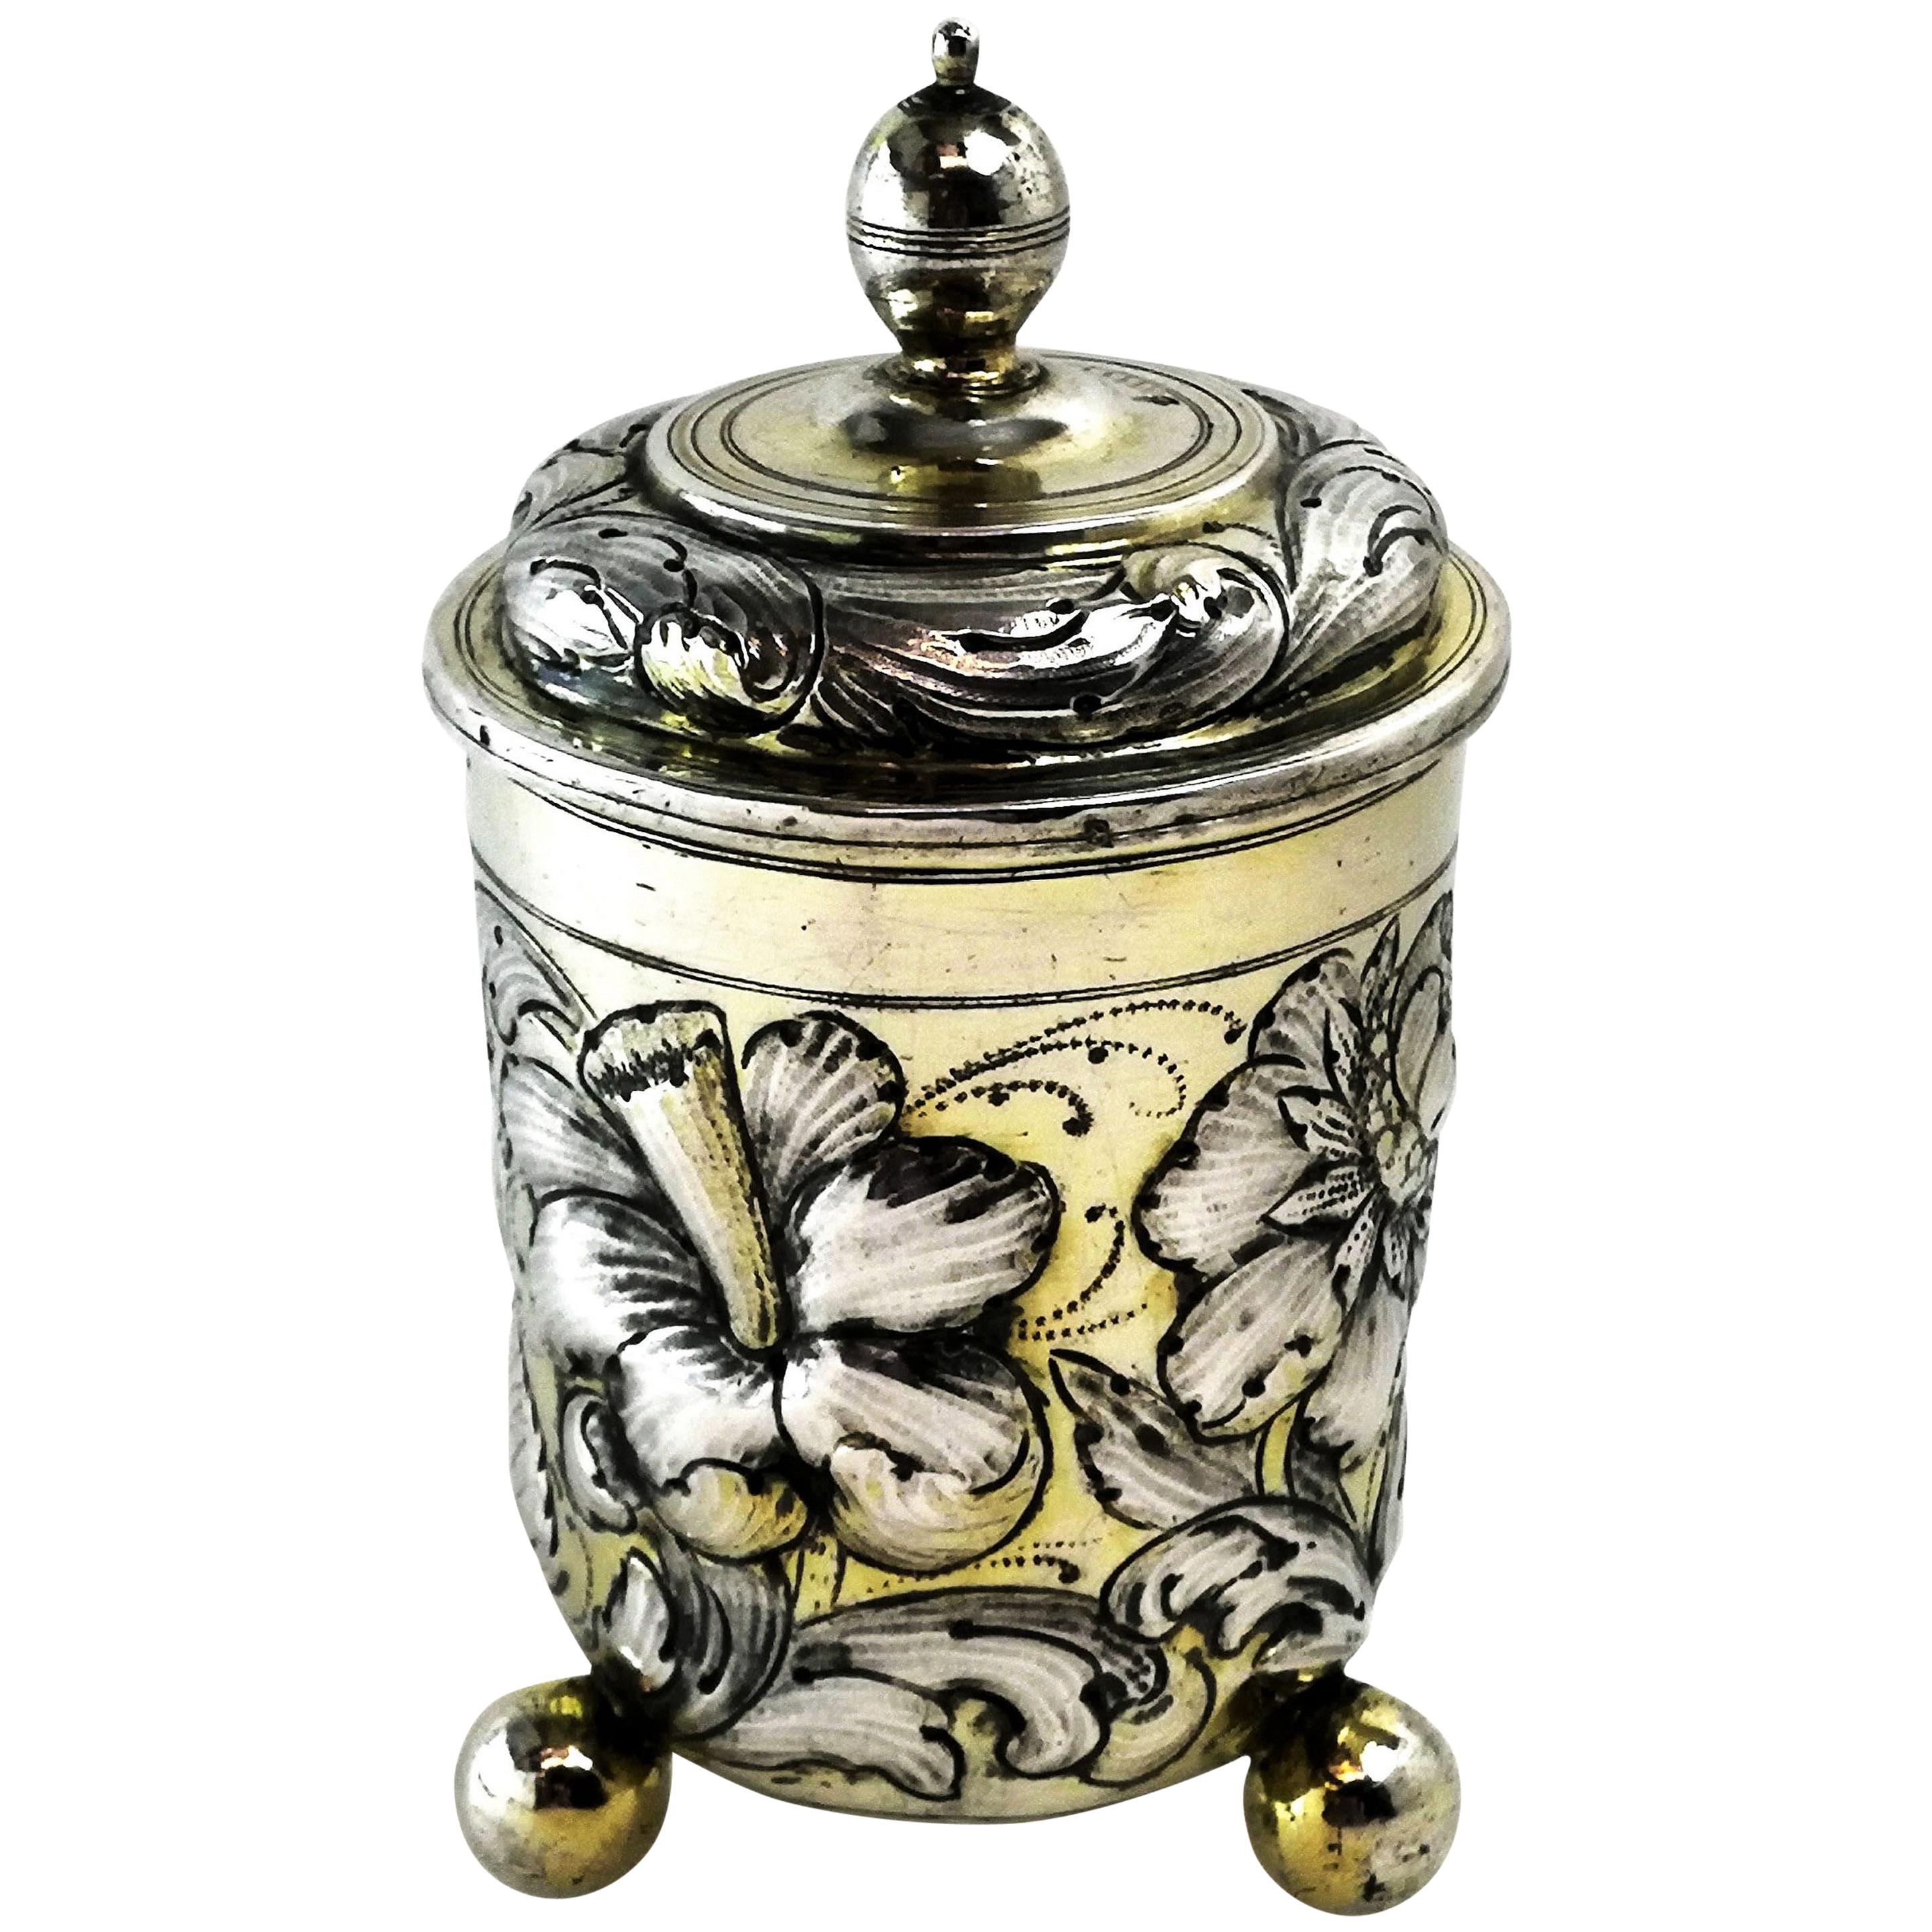 Antique Early German Silver Cup and Cover / Lidded Beaker circa 1680 Augsburg